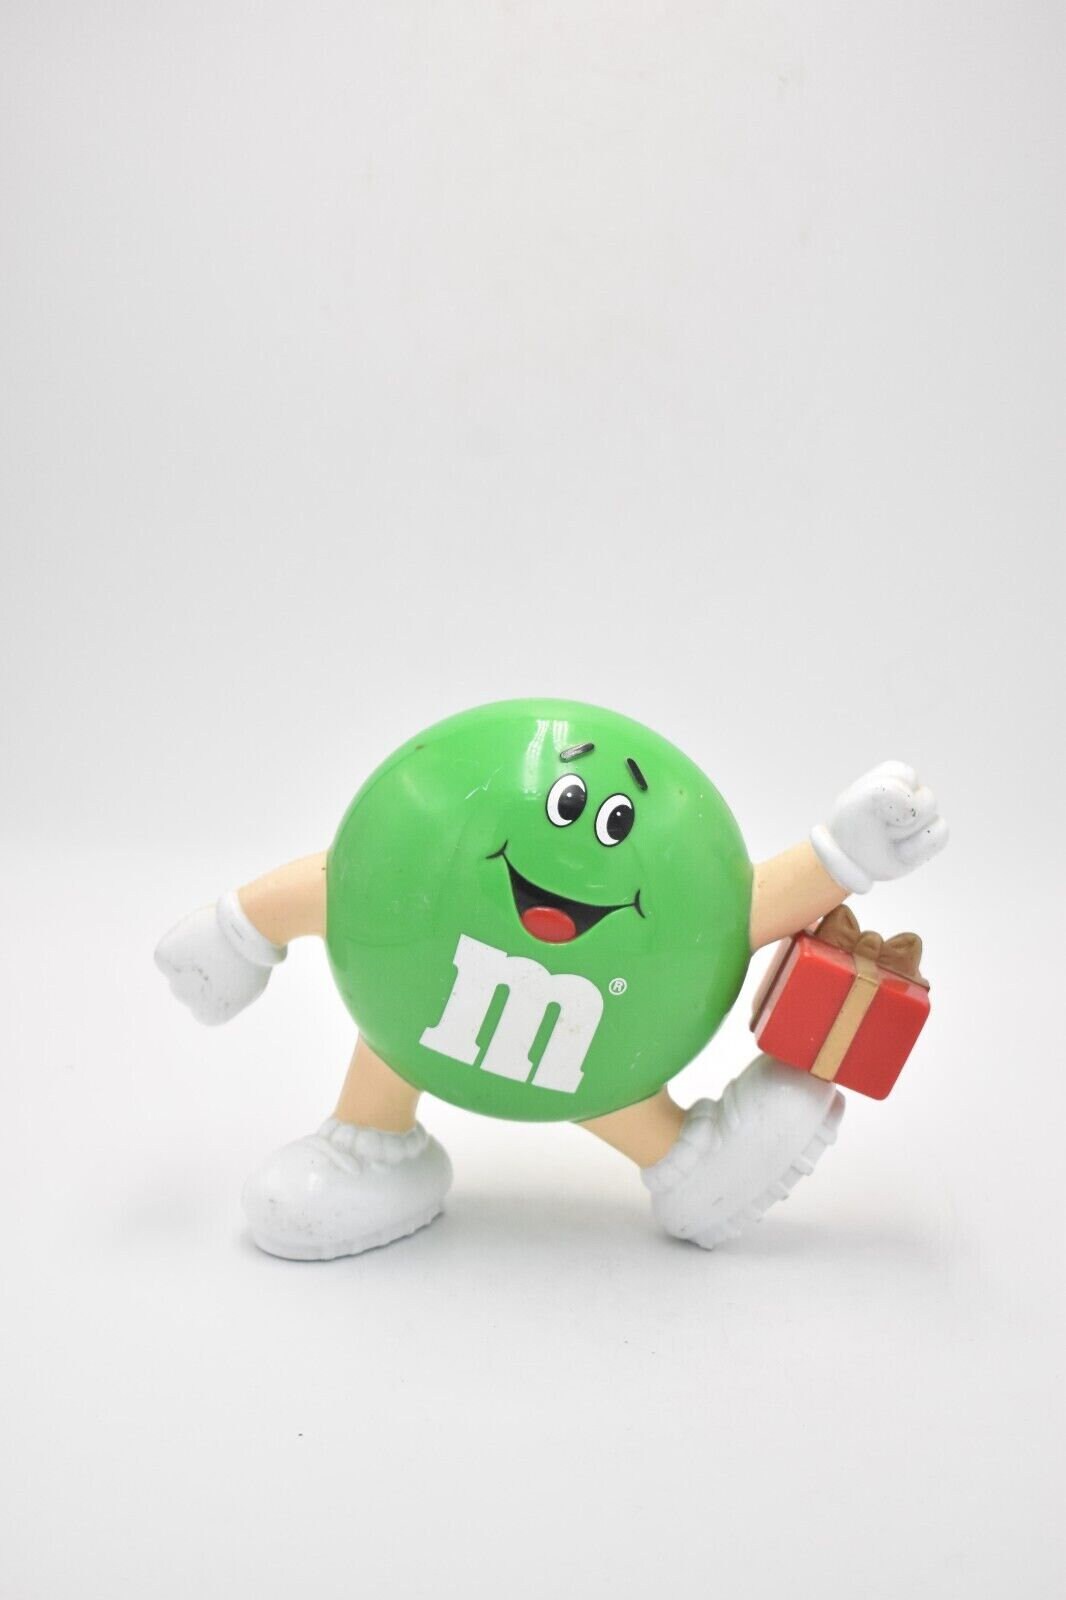 Green M&M's Girl BackPack Plush Bag Purse With White Boots MnM Candy  Chocolate